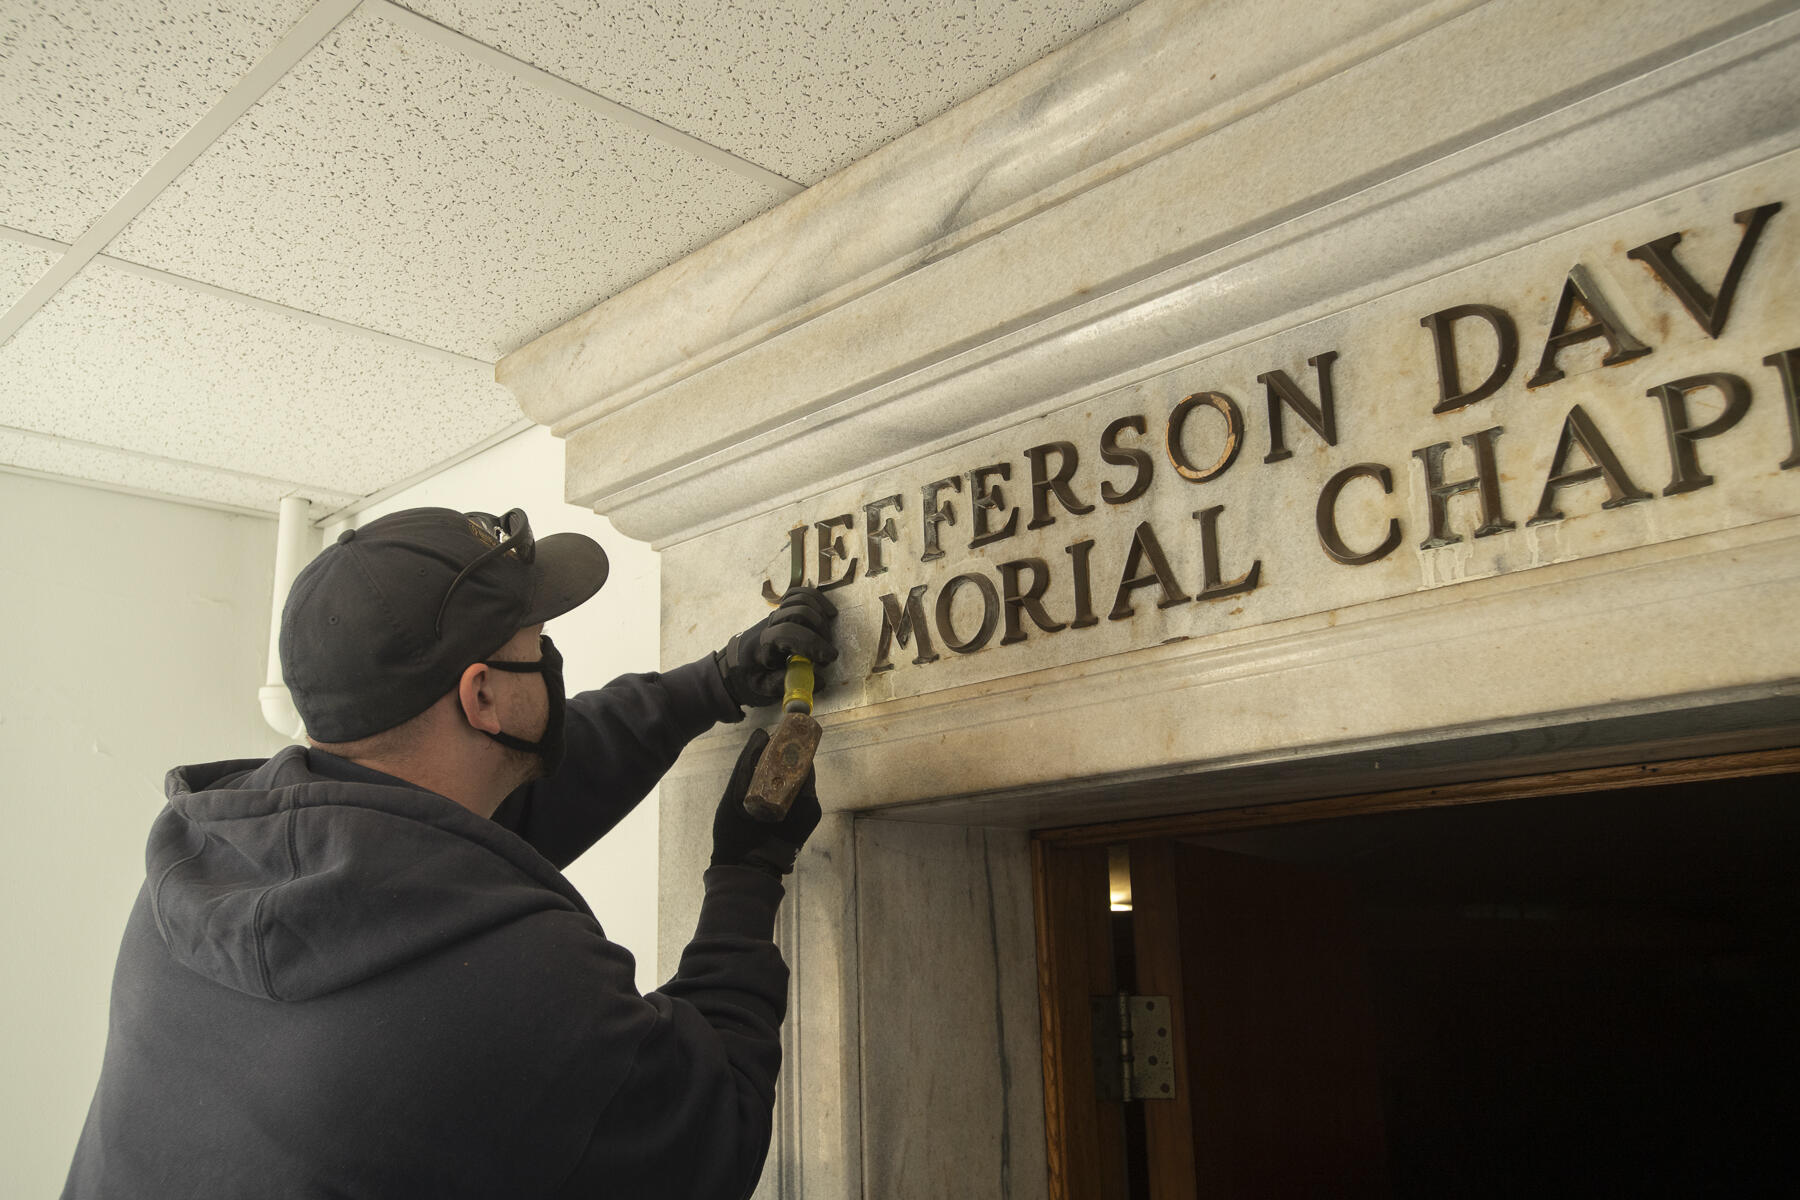 A V C U worker removes letters from the Jefferson Davis Memorial Chapel in the West Hospital.